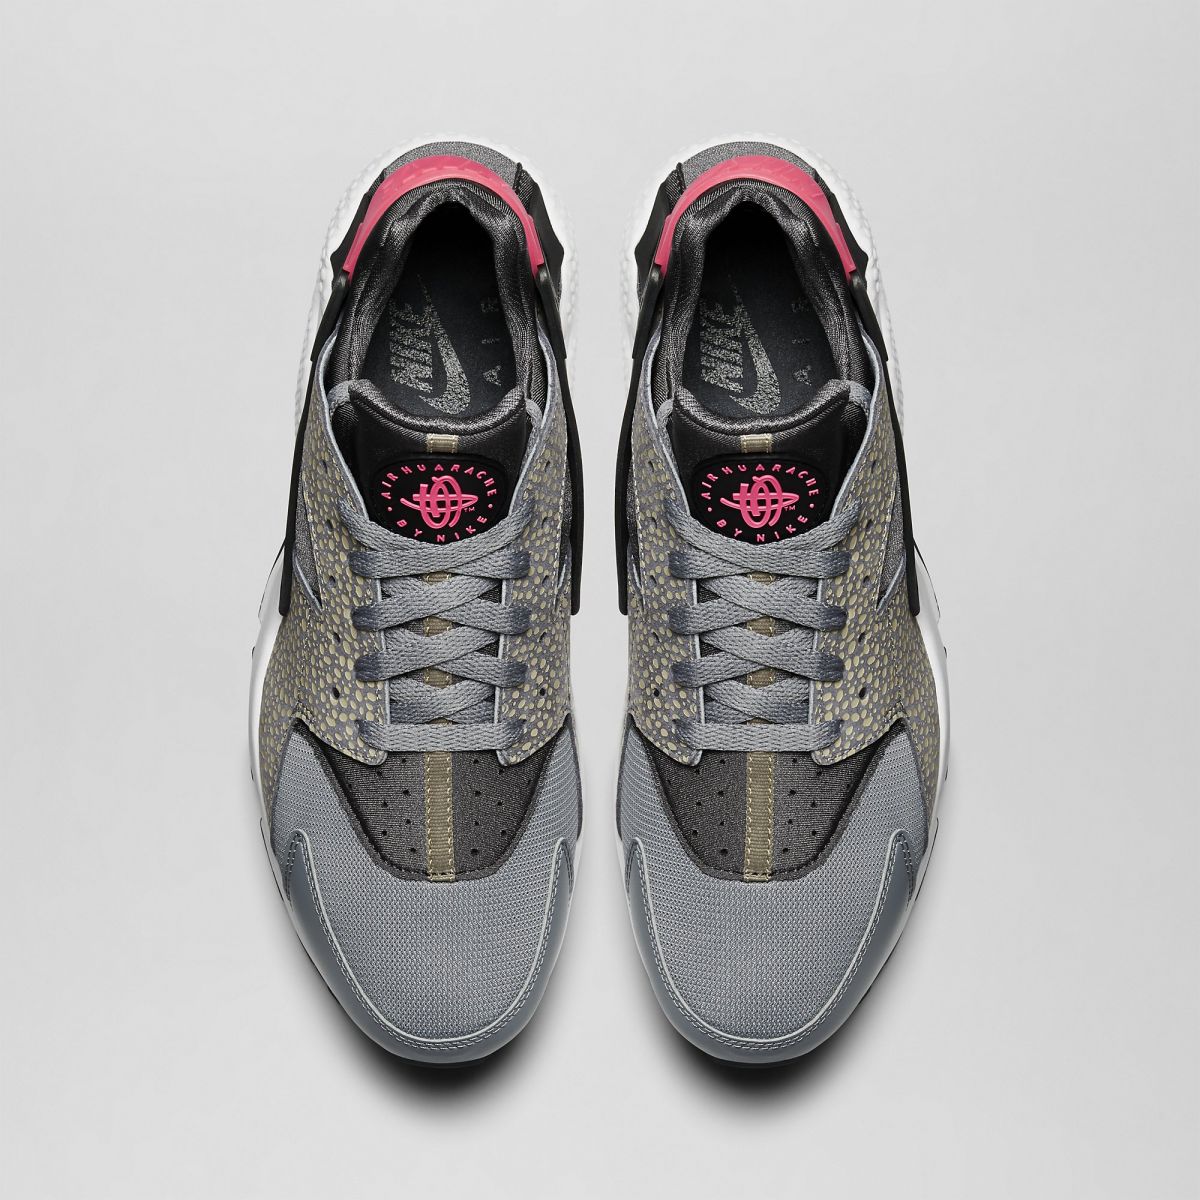 Monarchy Sports arithmetic Cool Grey" Air Huaraches with Safari Print | Sole Collector